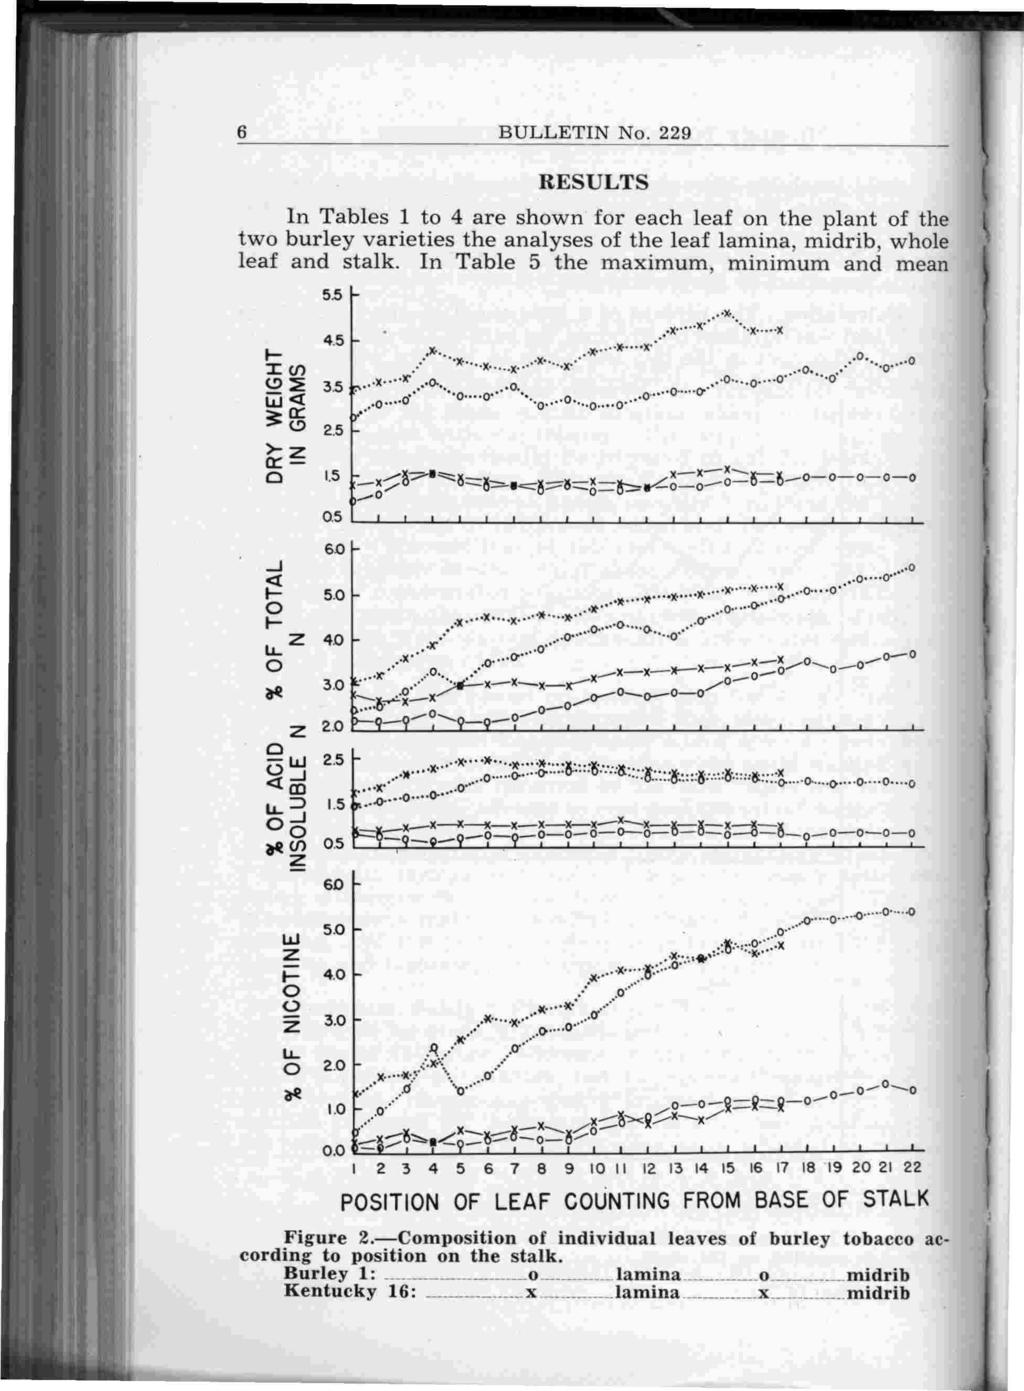 6 BULLETN No. 229 RESULTS n Tables 1 to 4 are shown for each leaf on the plant of the two burley varieties the analyses of the leaf lamina, midrib, whole leaf and stalk.